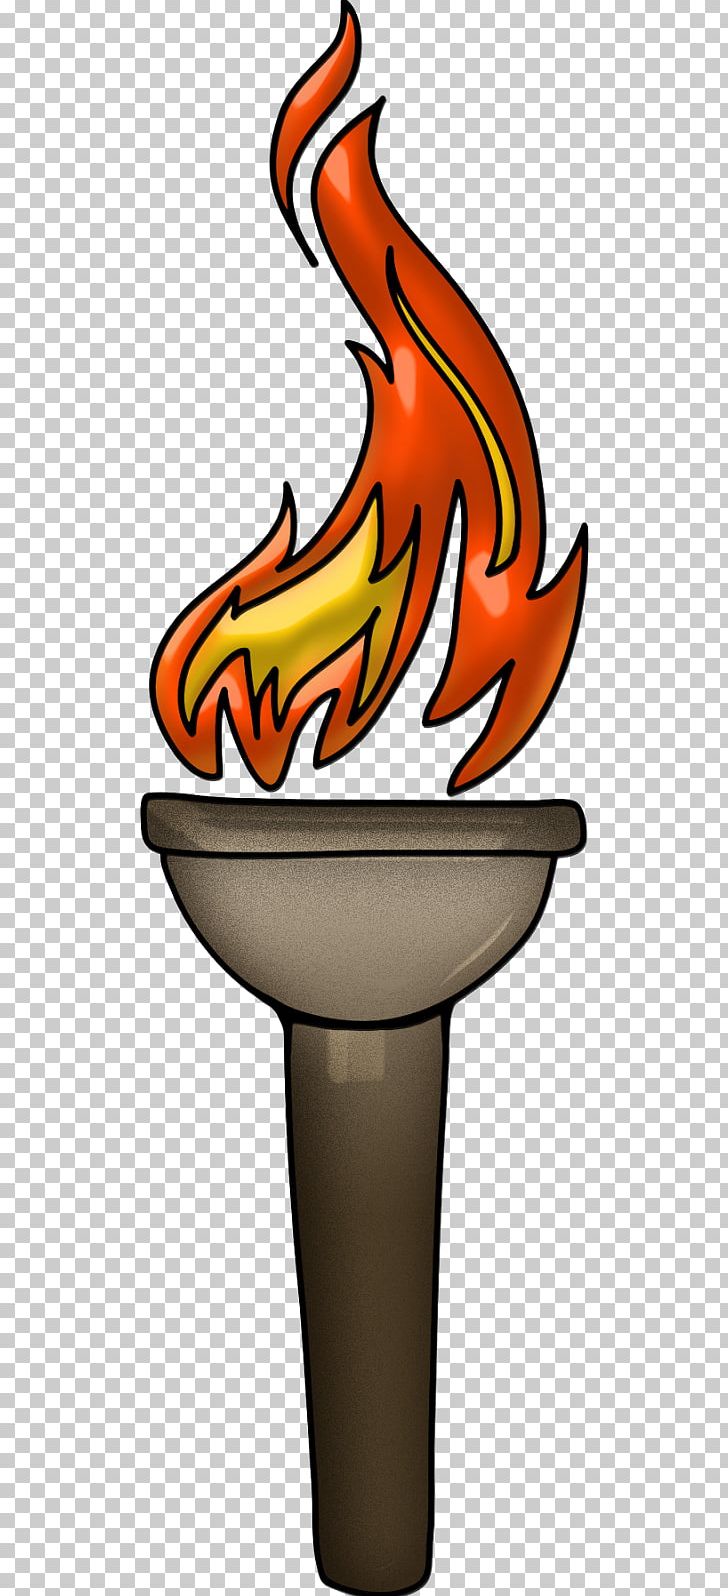 Olympic Games 2018 Winter Olympics Torch Relay PNG, Clipart, 2018 Winter Olympics, 2018 Winter Olympics Torch Relay, Aneis Olxedmpicos, Clip Art, Flame Free PNG Download